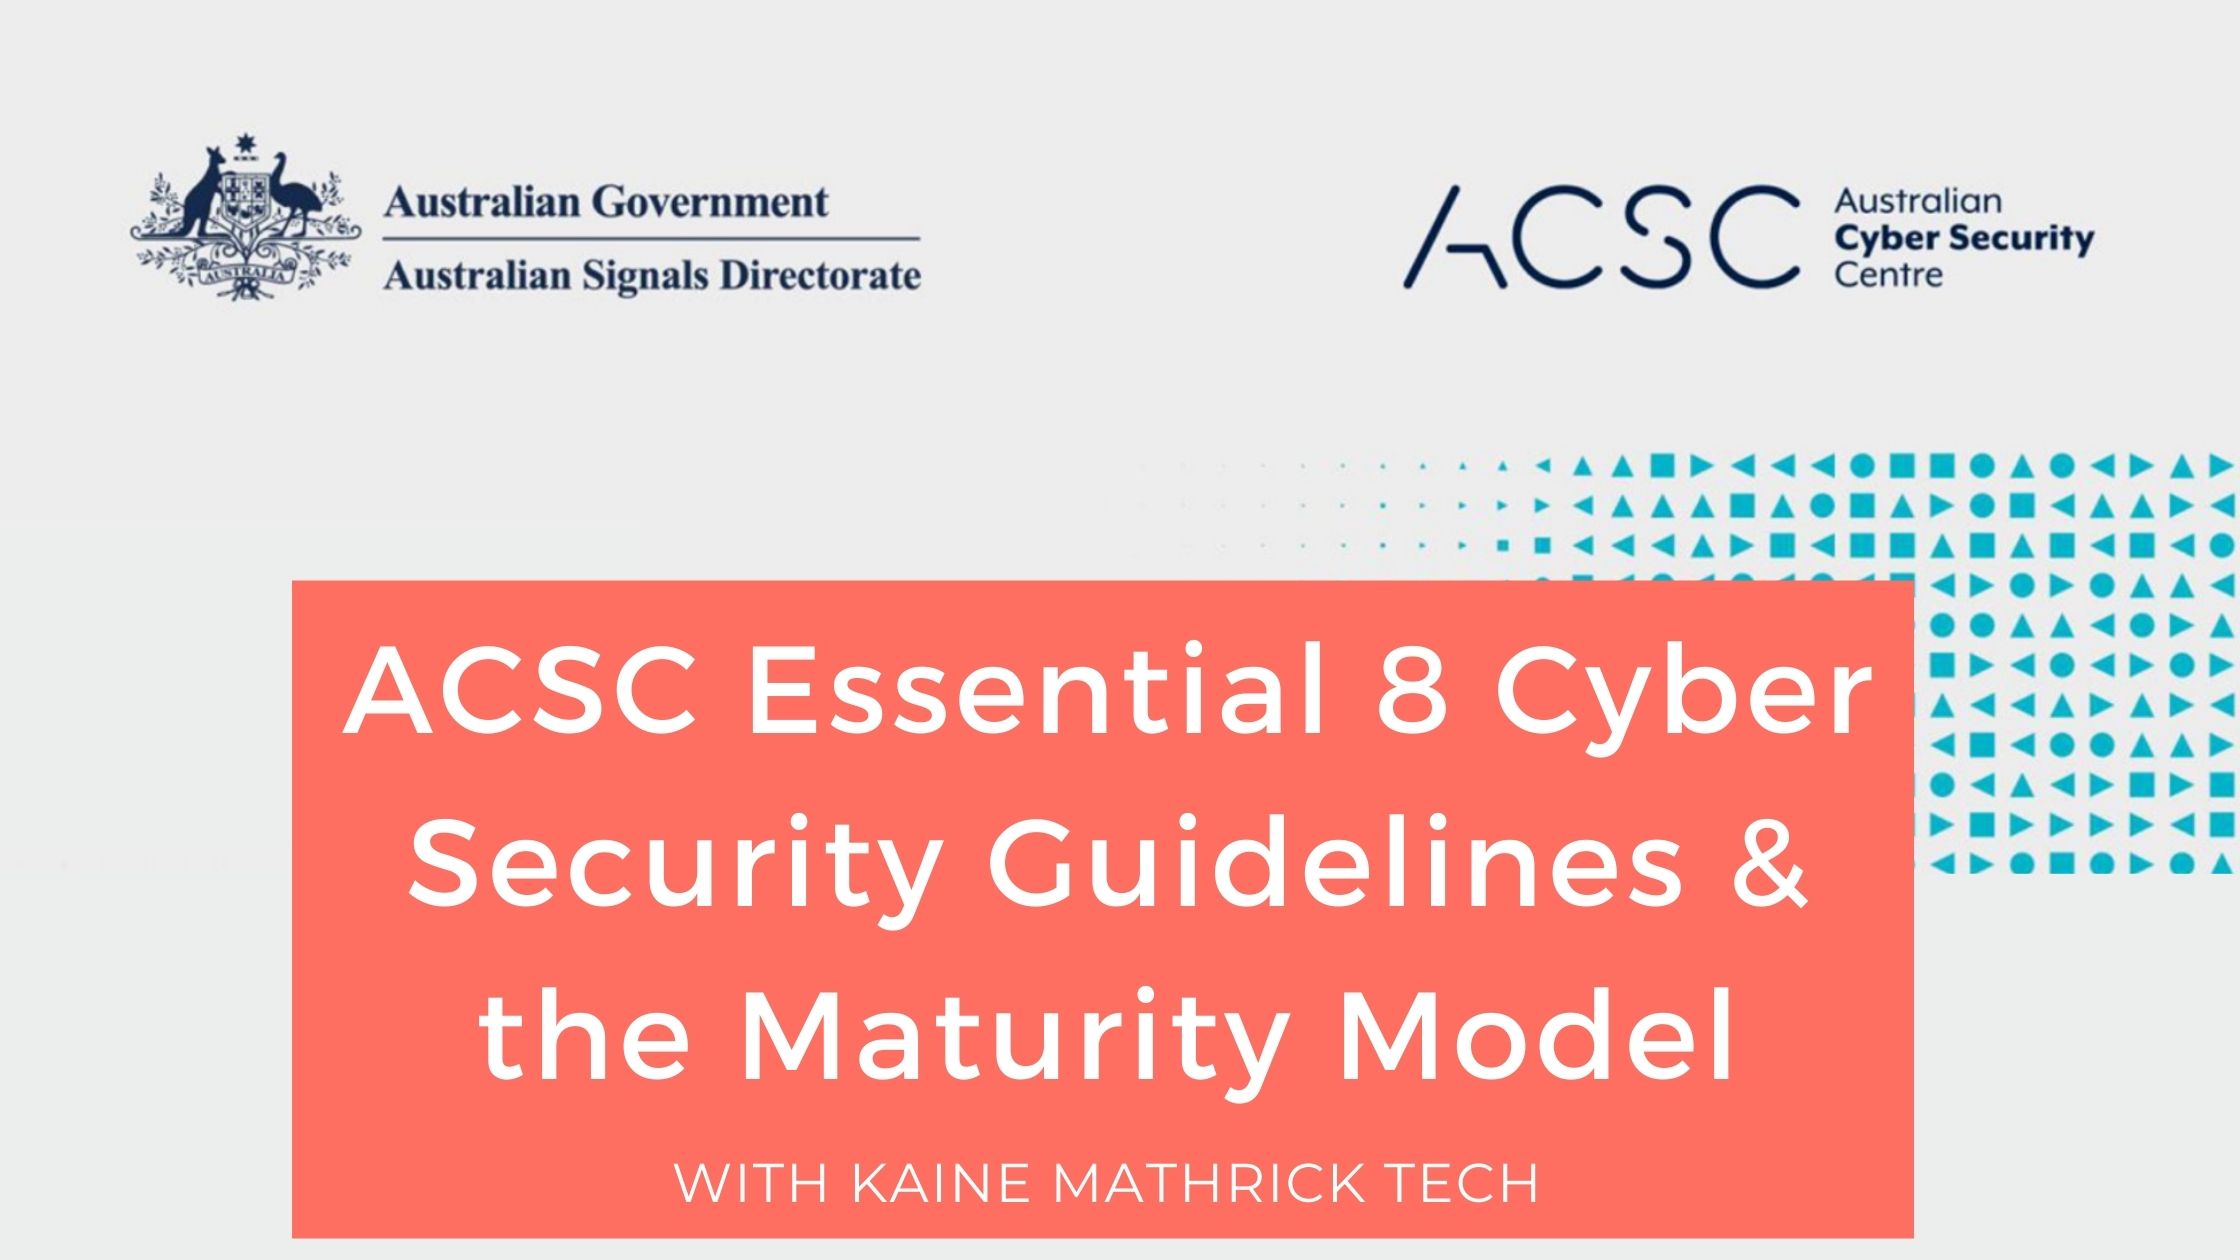 ACSC Essential 8 Cyber Security Guidelines & the Maturity Model